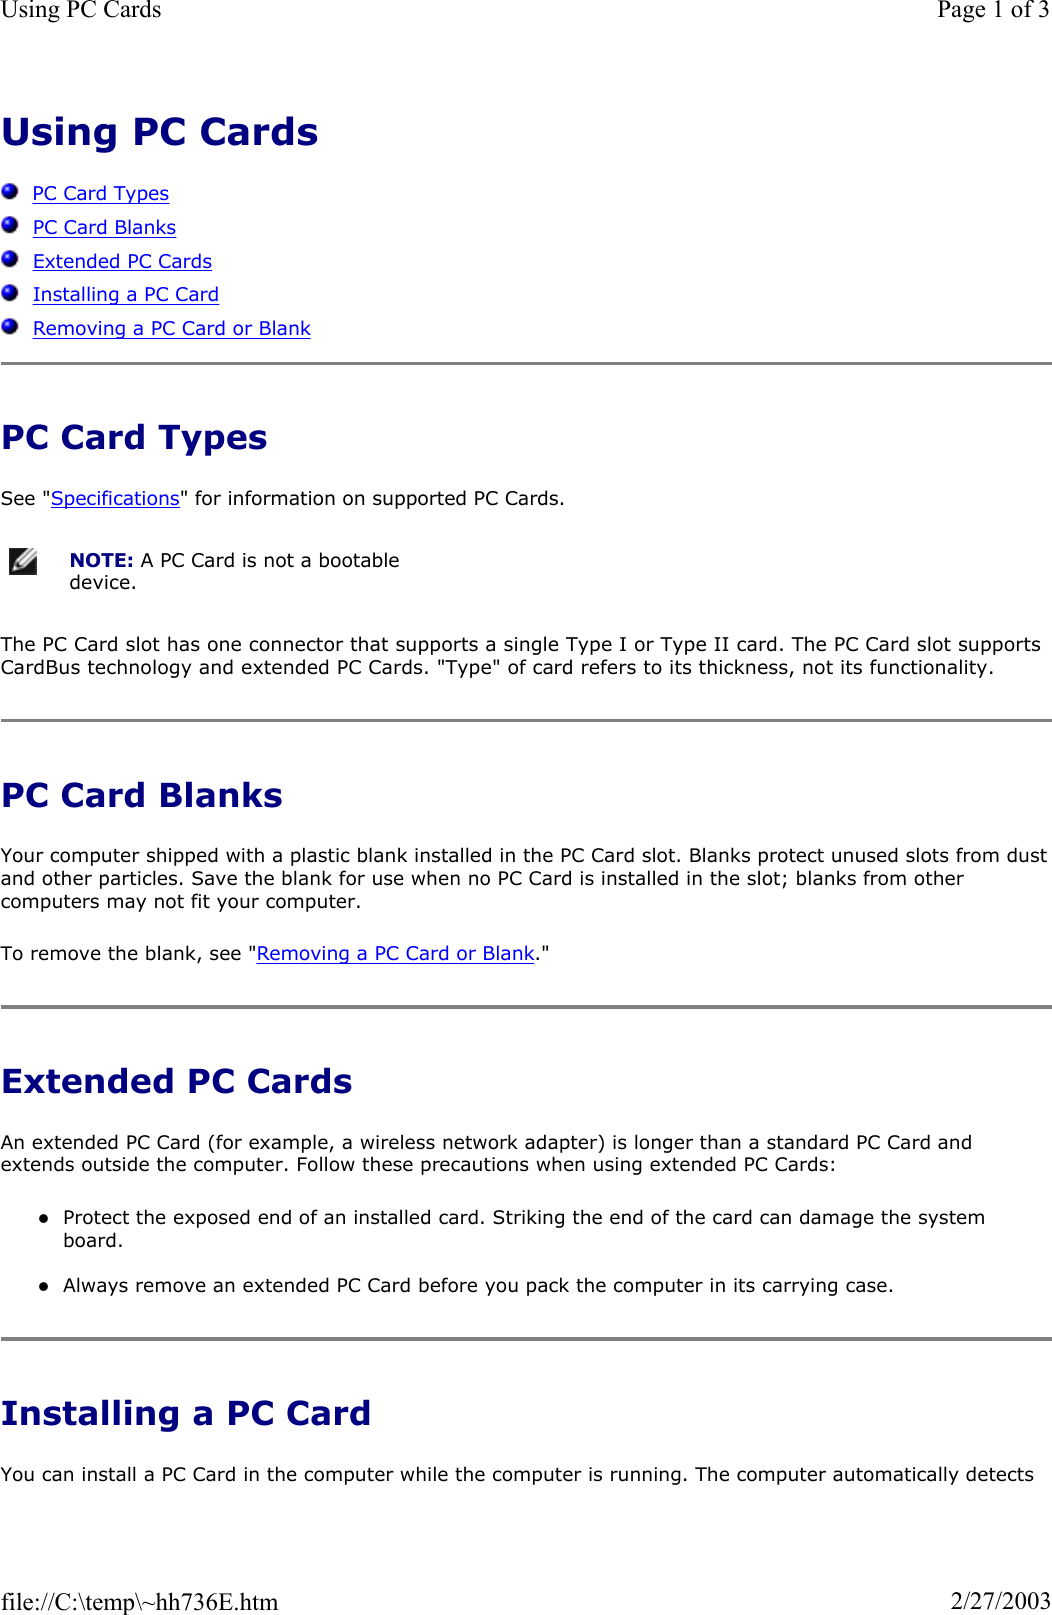 Using PC CardsPC Card TypesPC Card BlanksExtended PC CardsInstalling a PC CardRemoving a PC Card or BlankPC Card Types See &quot;Specifications&quot; for information on supported PC Cards. The PC Card slot has one connector that supports a single Type I or Type II card. The PC Card slot supports CardBus technology and extended PC Cards. &quot;Type&quot; of card refers to its thickness, not its functionality. PC Card Blanks Your computer shipped with a plastic blank installed in the PC Card slot. Blanks protect unused slots from dustand other particles. Save the blank for use when no PC Card is installed in the slot; blanks from other computers may not fit your computer. To remove the blank, see &quot;Removing a PC Card or Blank.&quot;Extended PC Cards An extended PC Card (for example, a wireless network adapter) is longer than a standard PC Card and extends outside the computer. Follow these precautions when using extended PC Cards: zProtect the exposed end of an installed card. Striking the end of the card can damage the system board. zAlways remove an extended PC Card before you pack the computer in its carrying case. Installing a PC Card You can install a PC Card in the computer while the computer is running. The computer automatically detects NOTE: A PC Card is not a bootable device.Page 1 of 3Using PC Cards2/27/2003file://C:\temp\~hh736E.htm